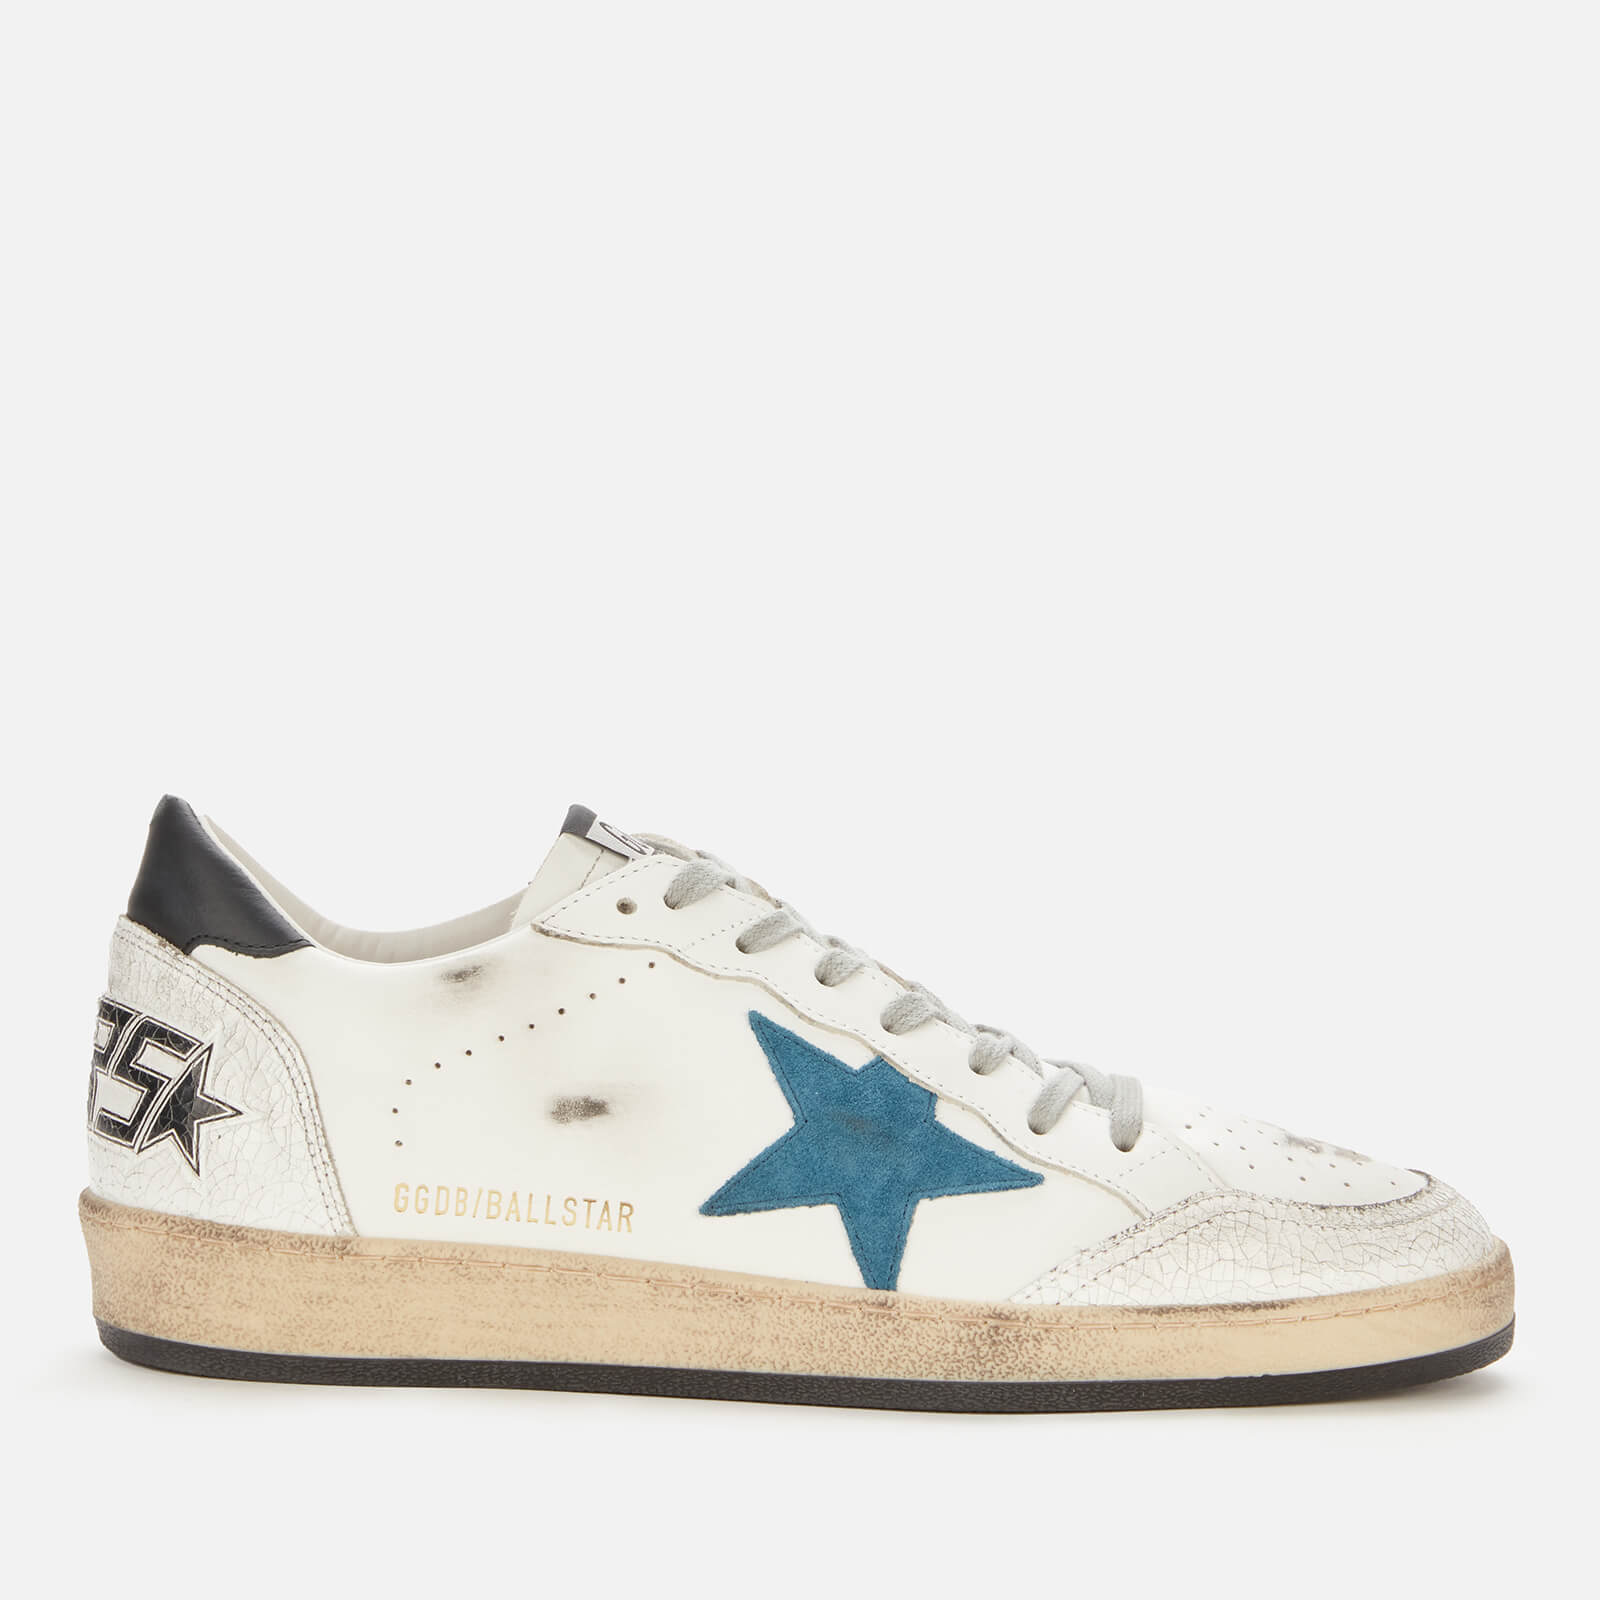 Golden Goose Deluxe Brand Men's Ball Star Leather Trainers - White/Blue Storm - UK 8